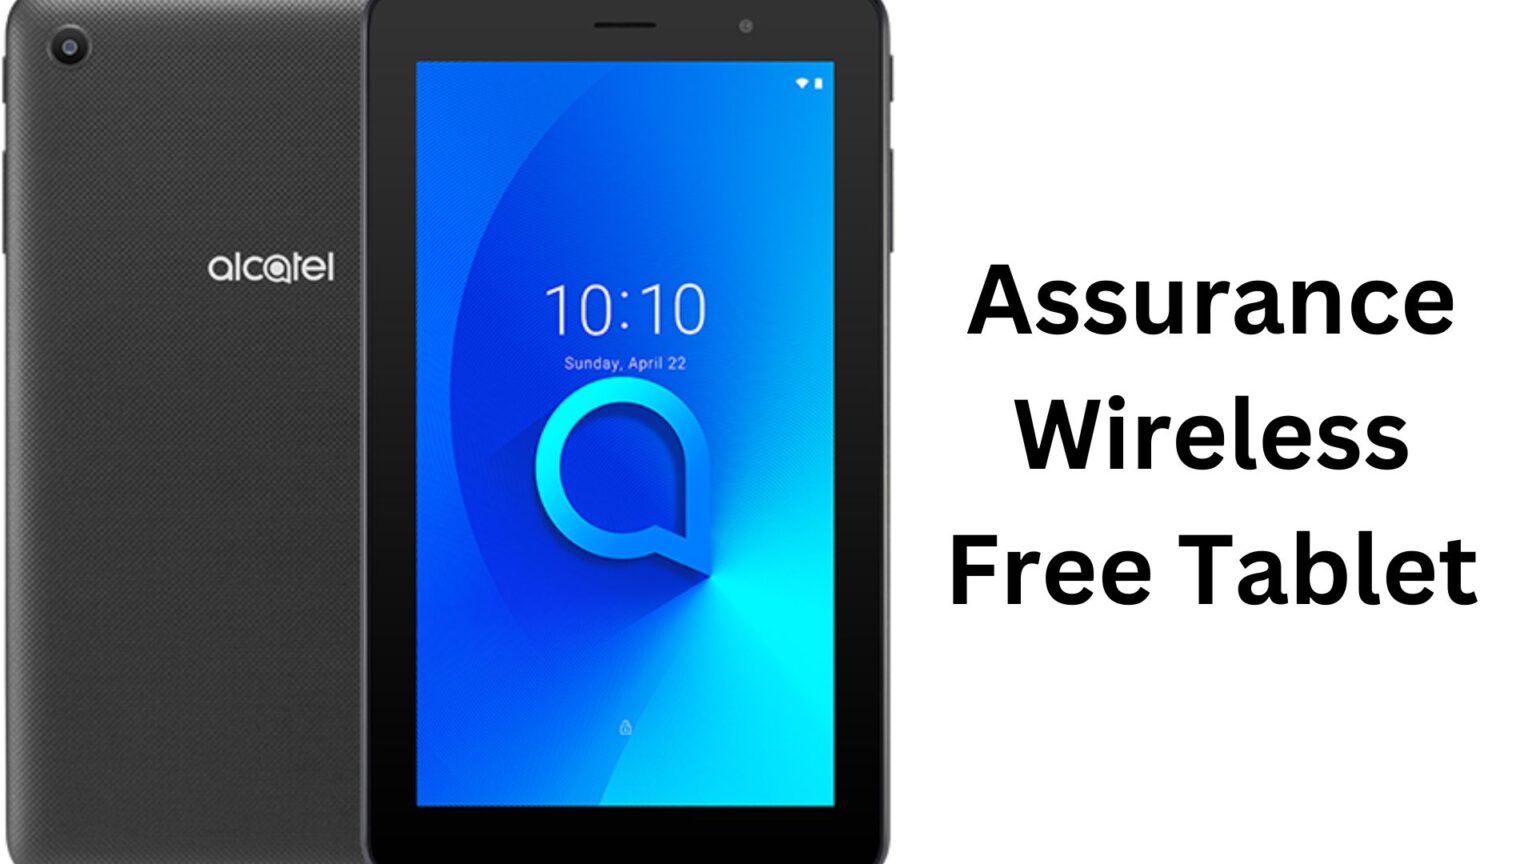 Assurance Wireless How To Apply For A Free Tablet And Other Benefits Apxv 9814